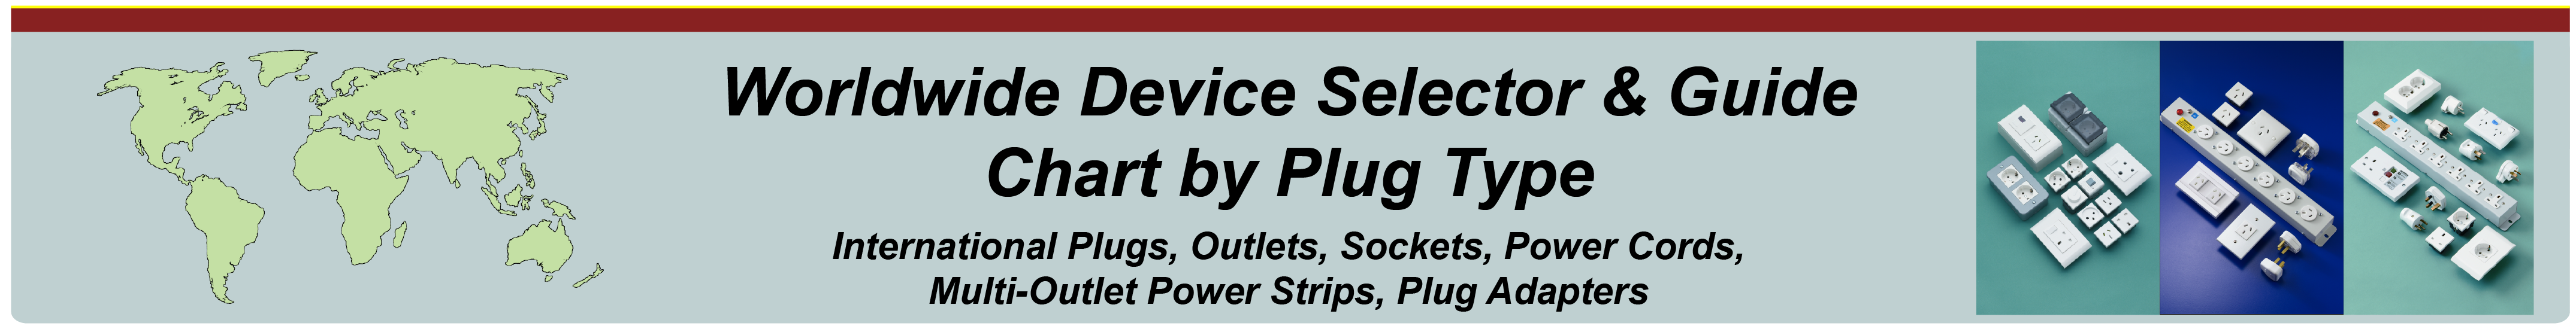 Worldwide Device Selector and Guide - Chart by Plug Type